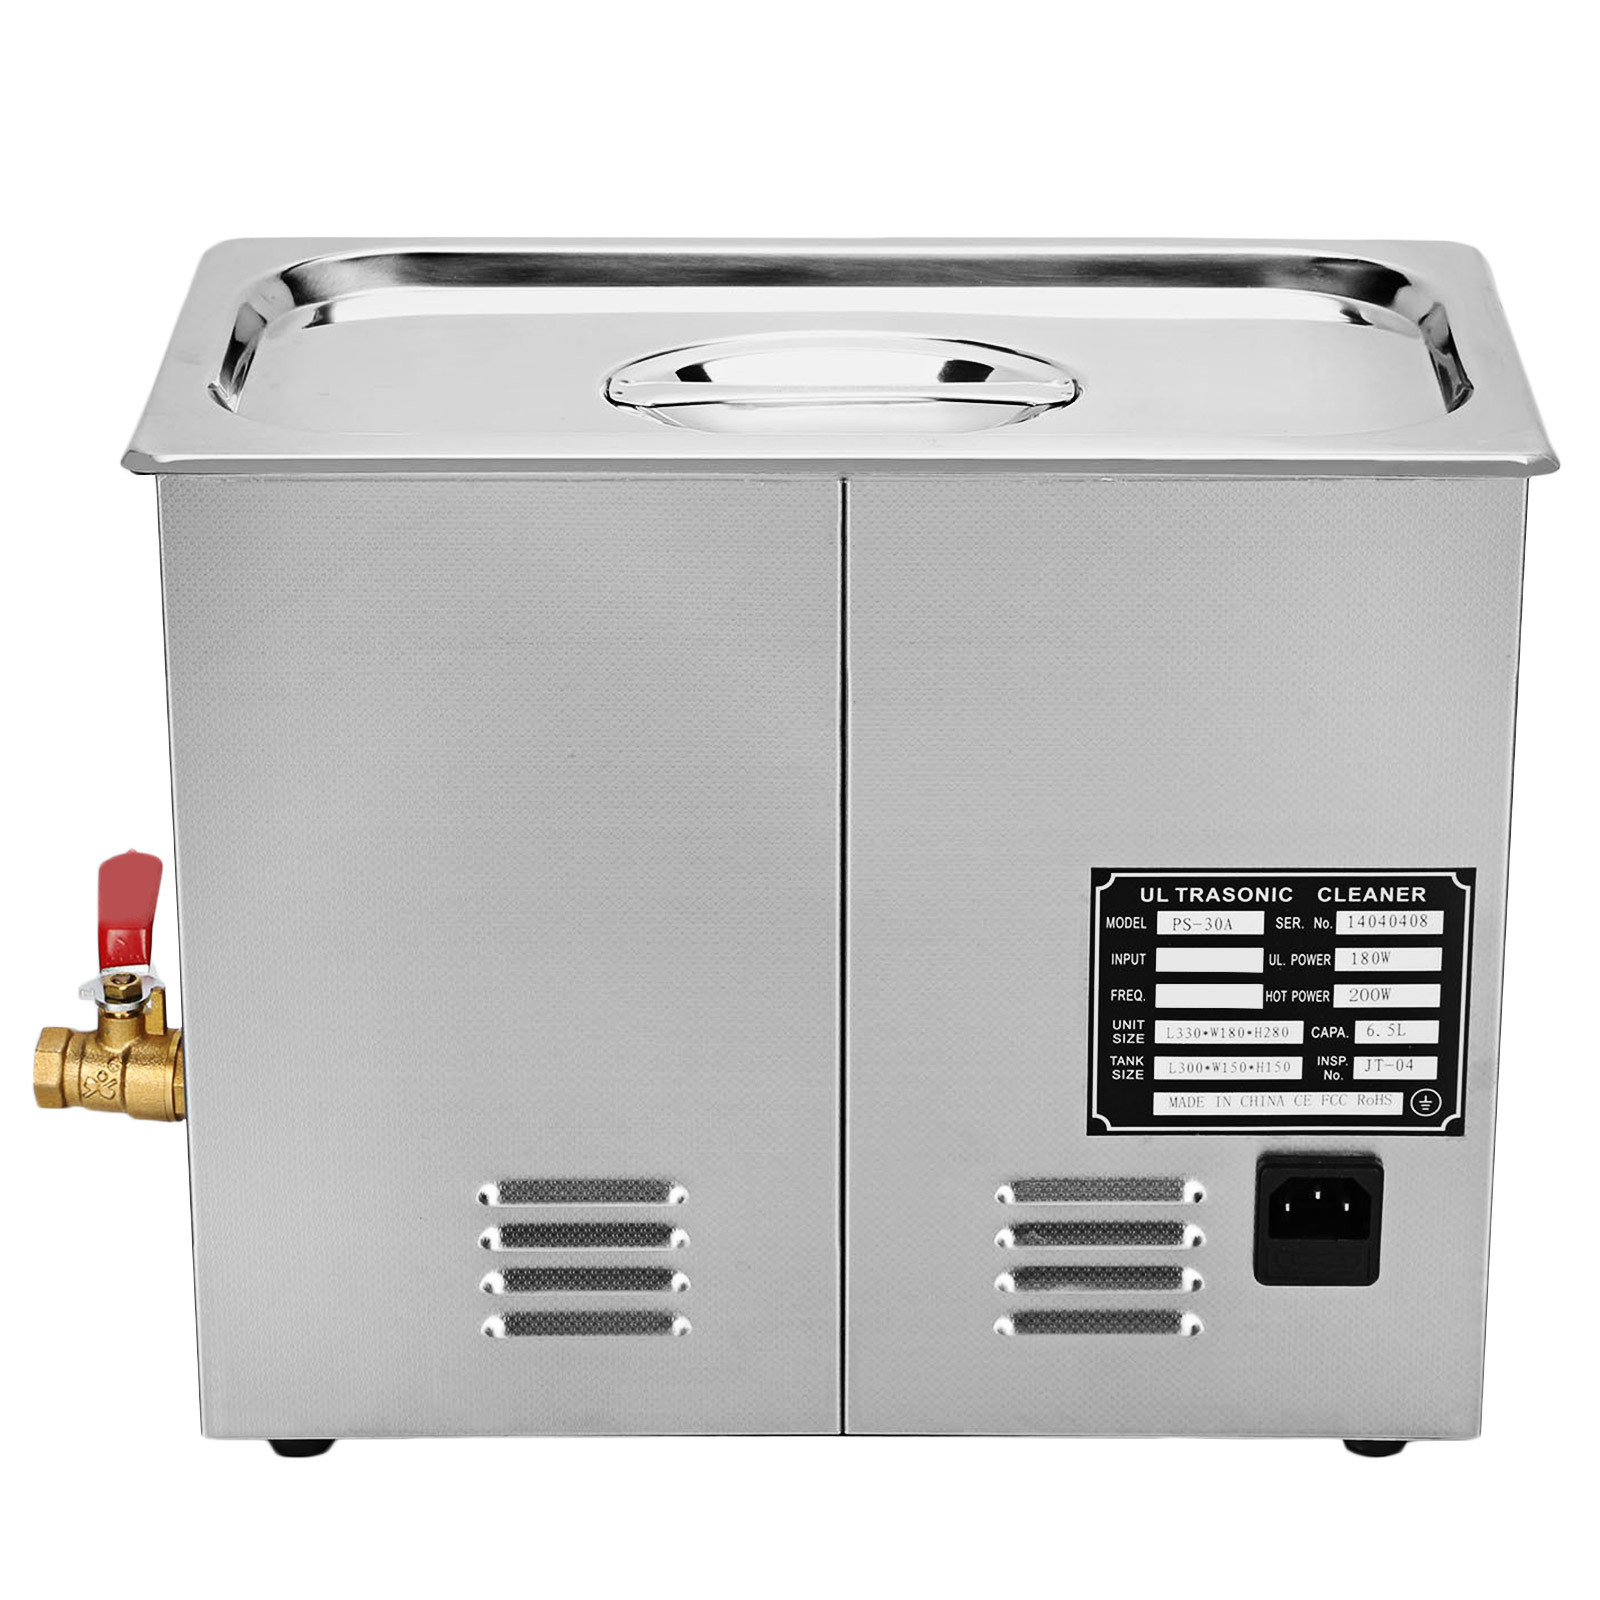 VEVOR 22L Industrial Ultrasonic Cleaner with Digital Timer&Heater 40kHz  Professional Ultrasonic Cleaner 110V with Excellent Cleaning Effect for  Wrench Tools Industrial Parts Mental Apparatus